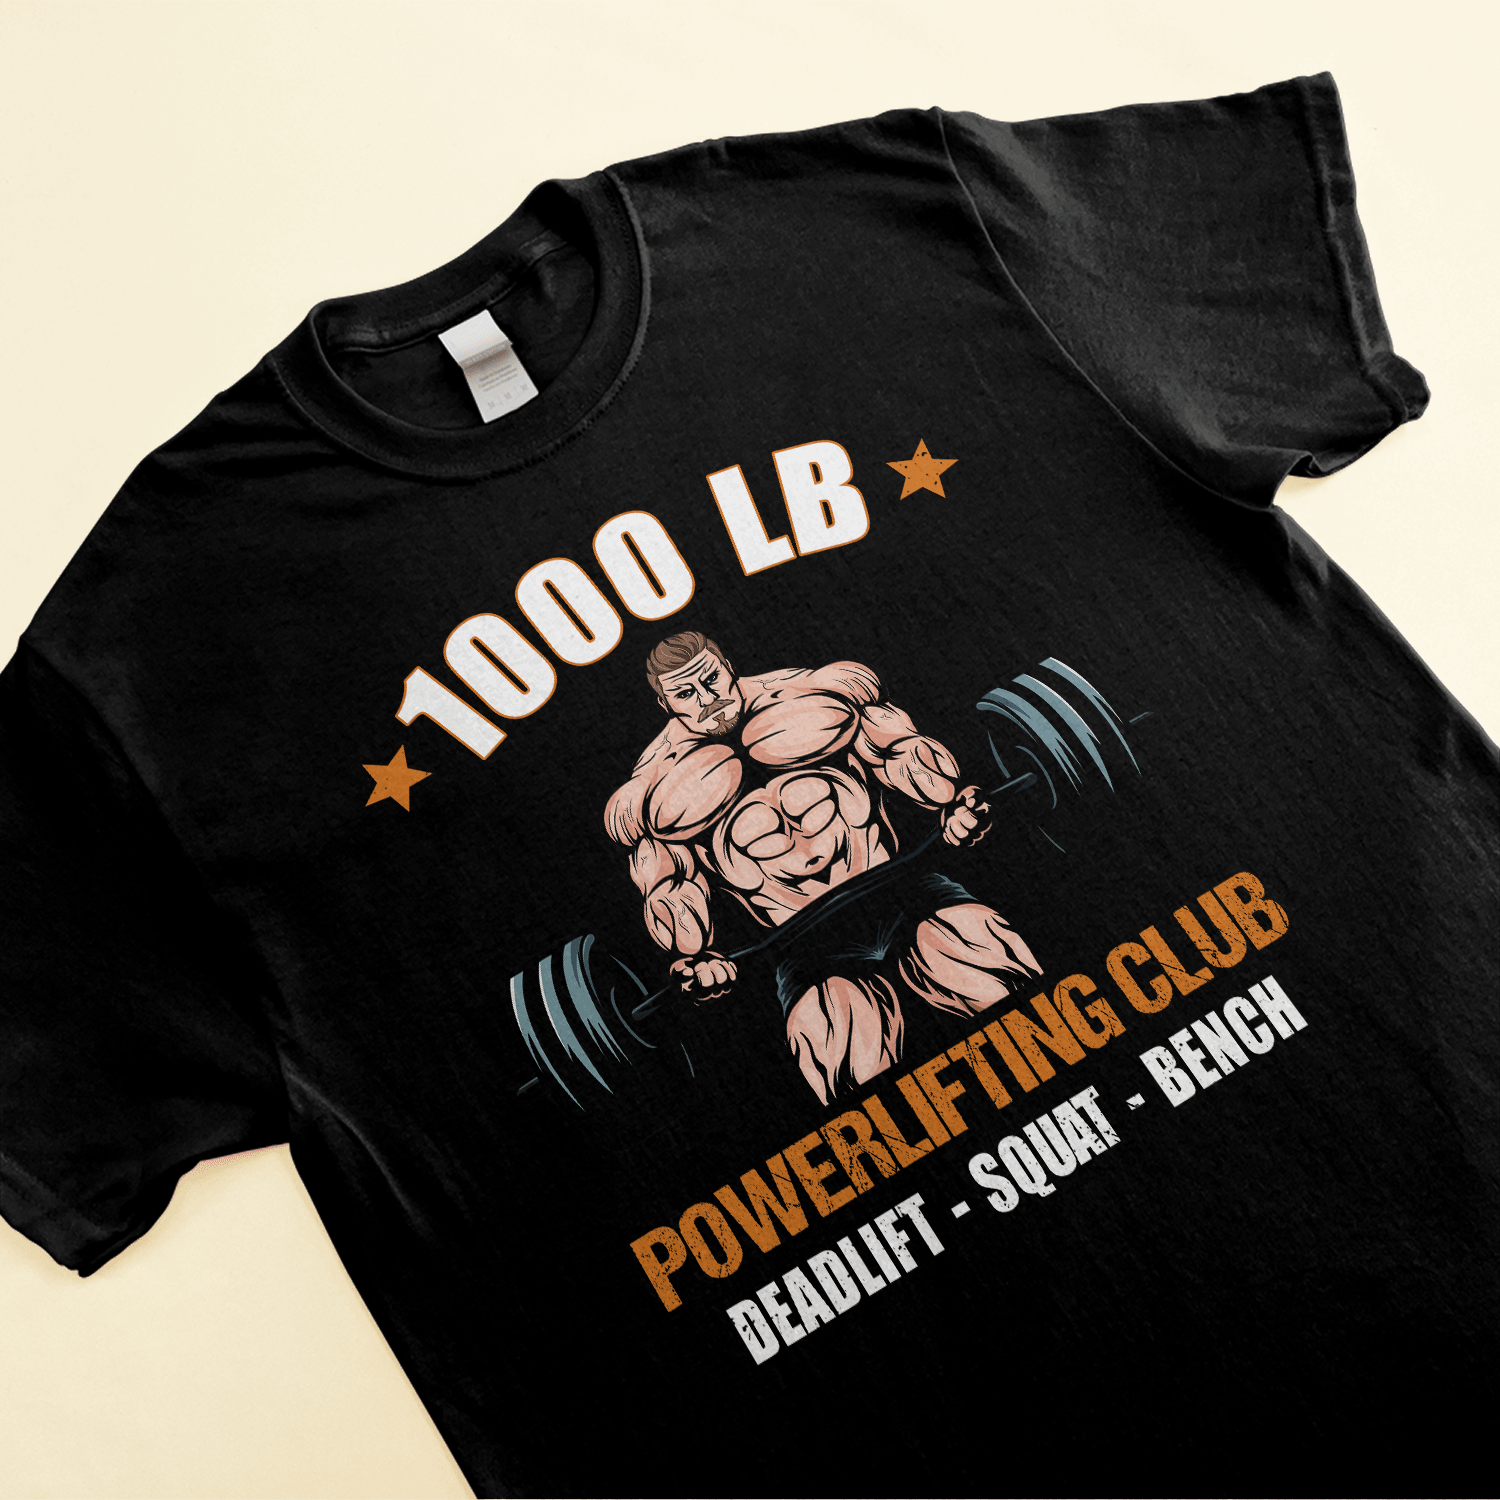 1000 lb Club - Personalized Shirt - Birthday Gift for Powerlifting Lovers Sweater / Forest Green / 3XL